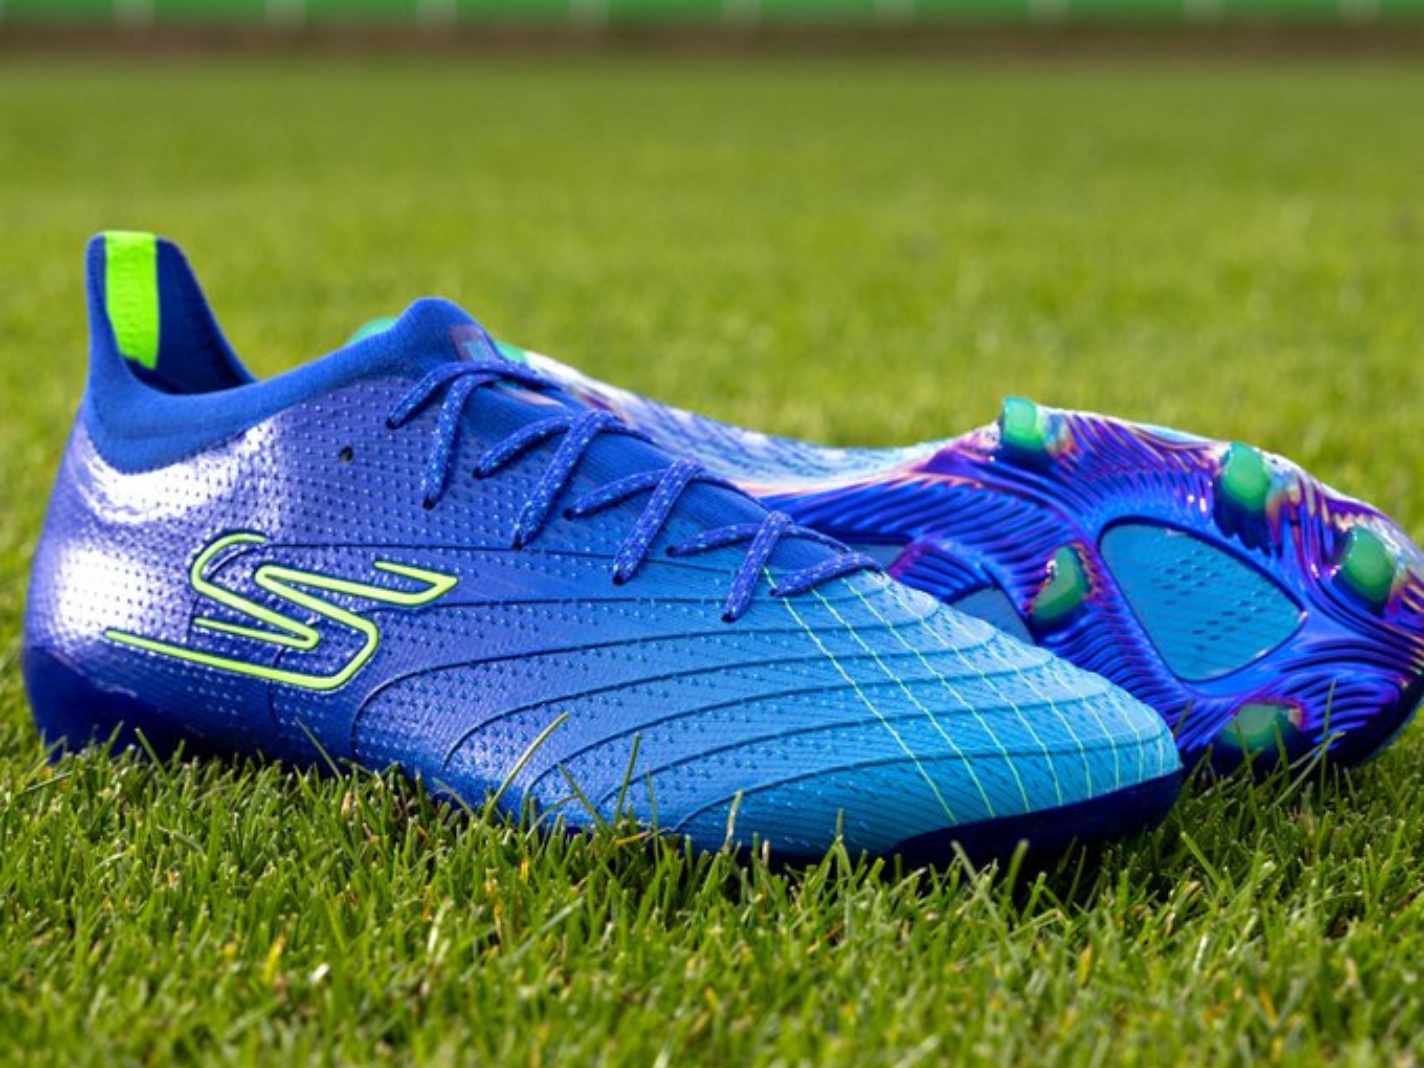 The Real Reason Why Skechers and Football Boots Seem Like an Odd Match